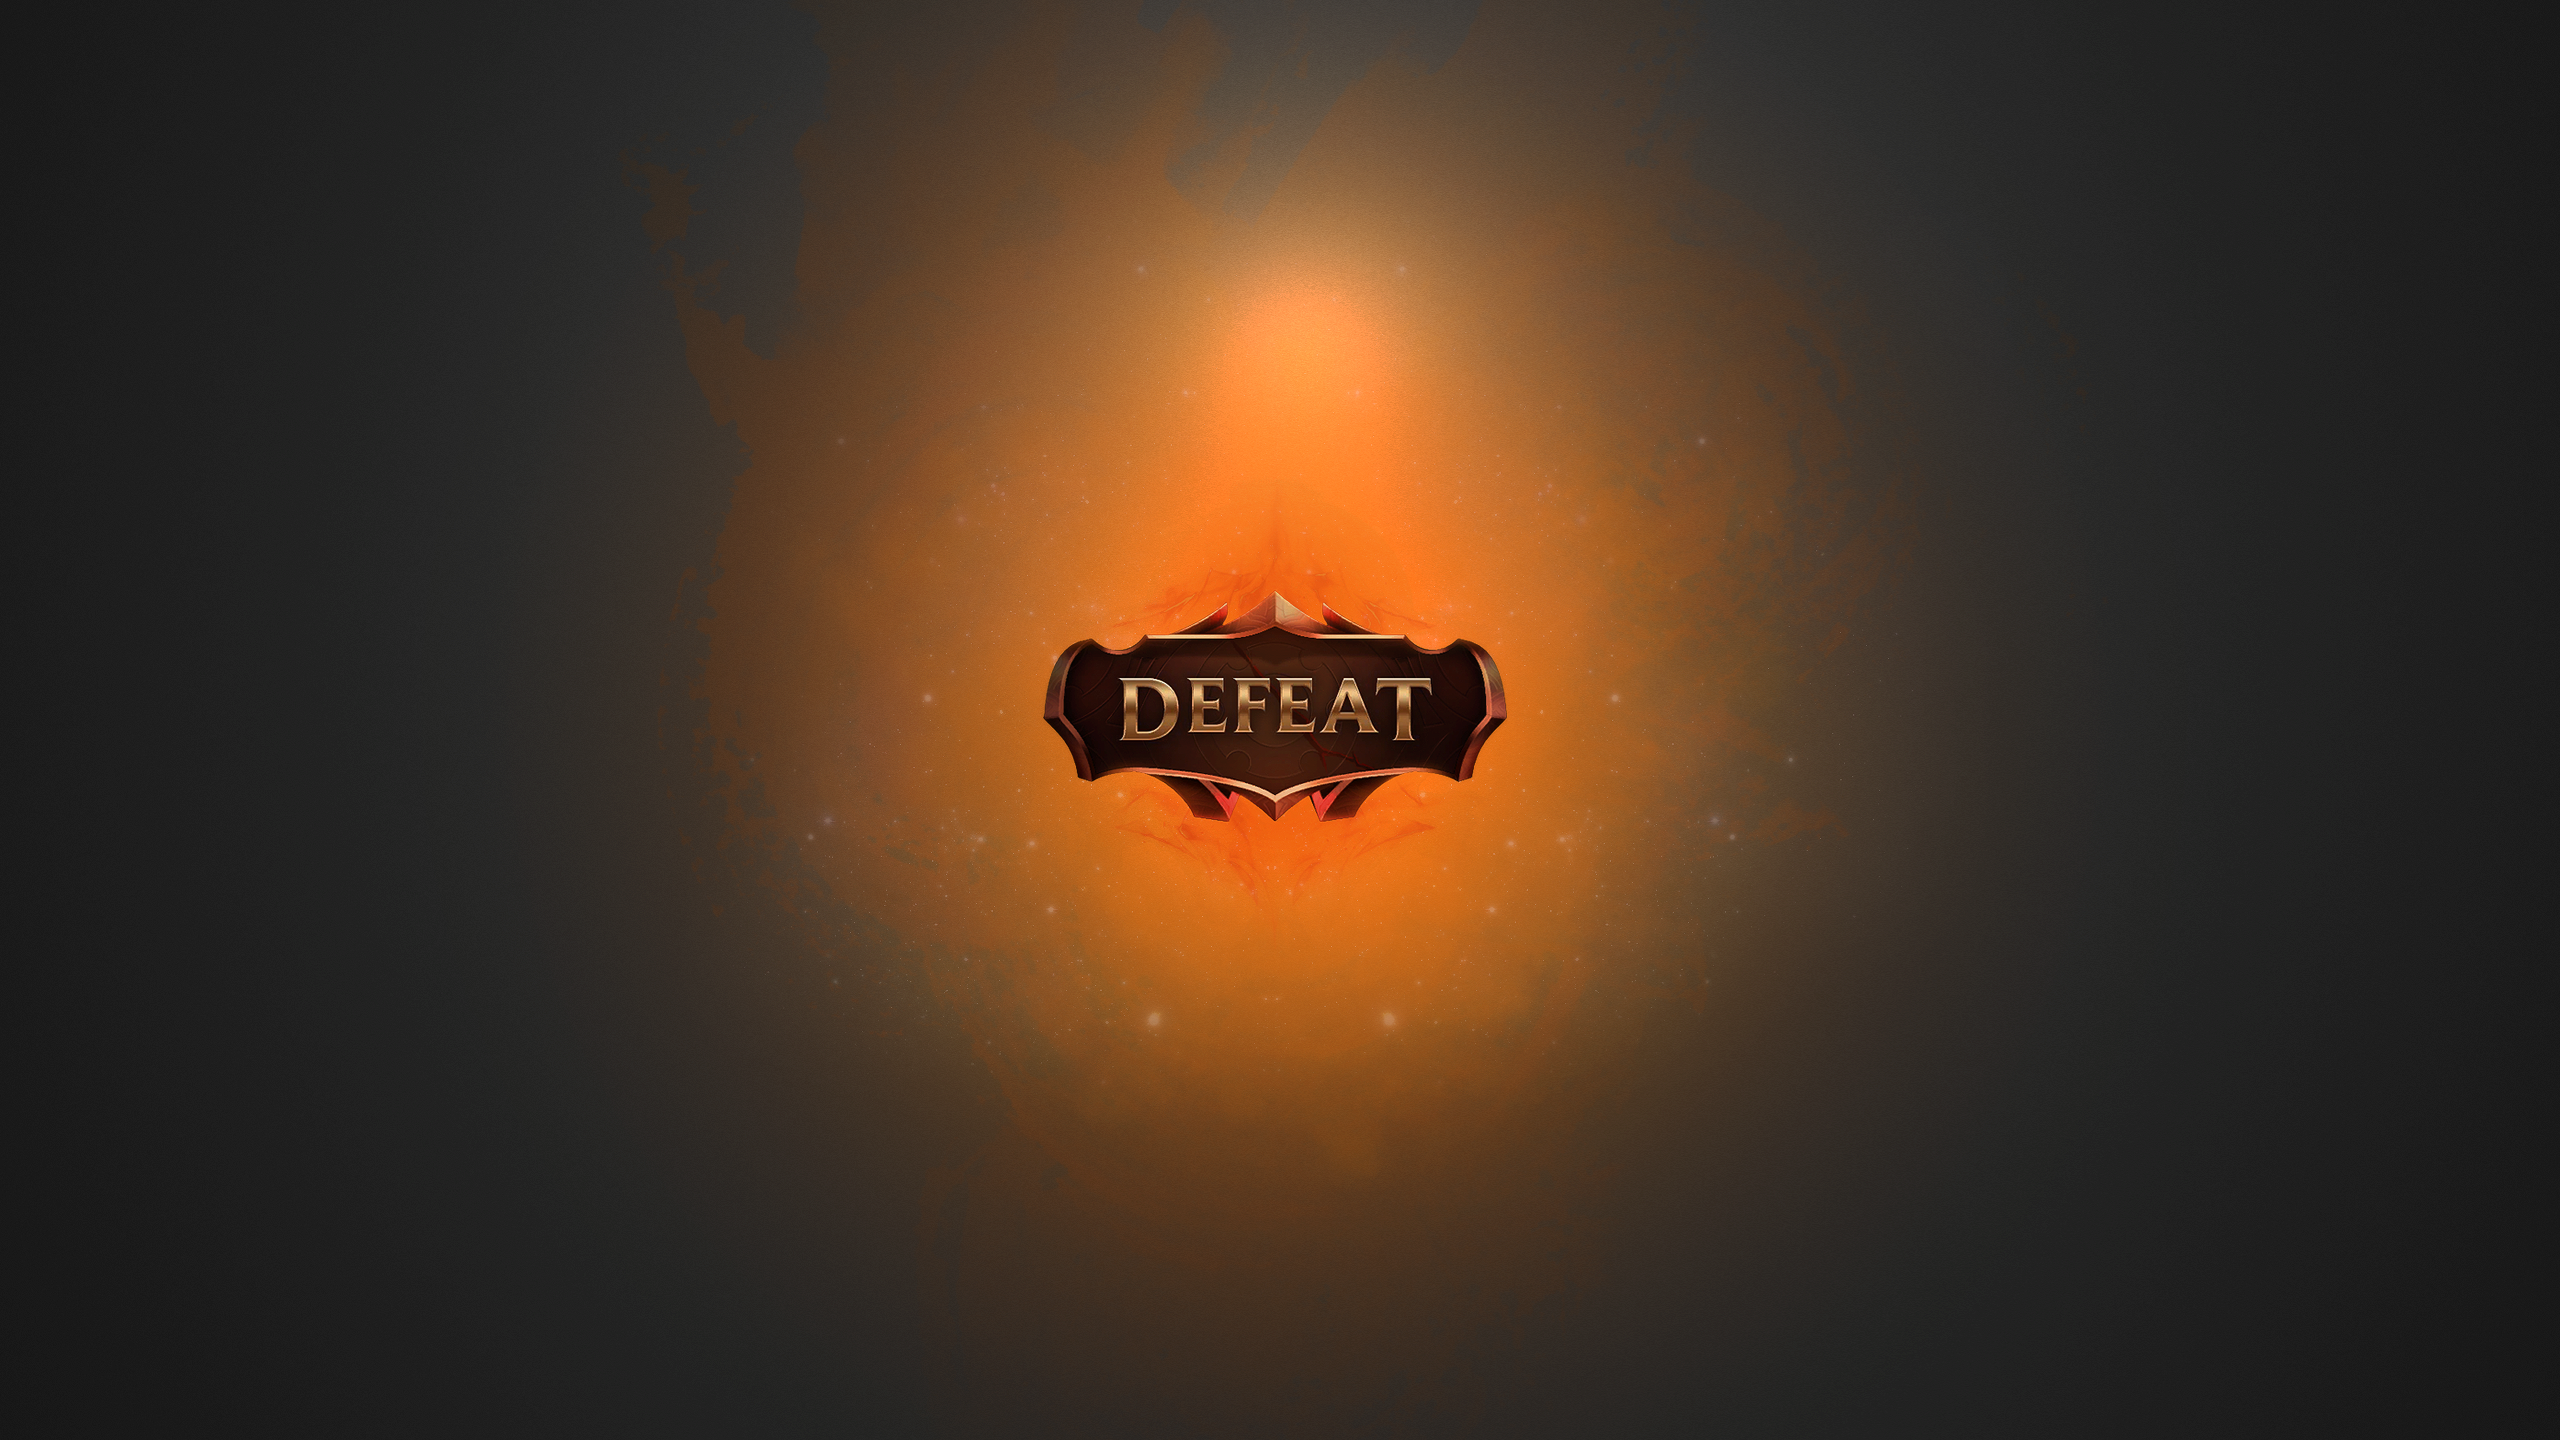 I made some wallpapers with the new VictoryDefeat images